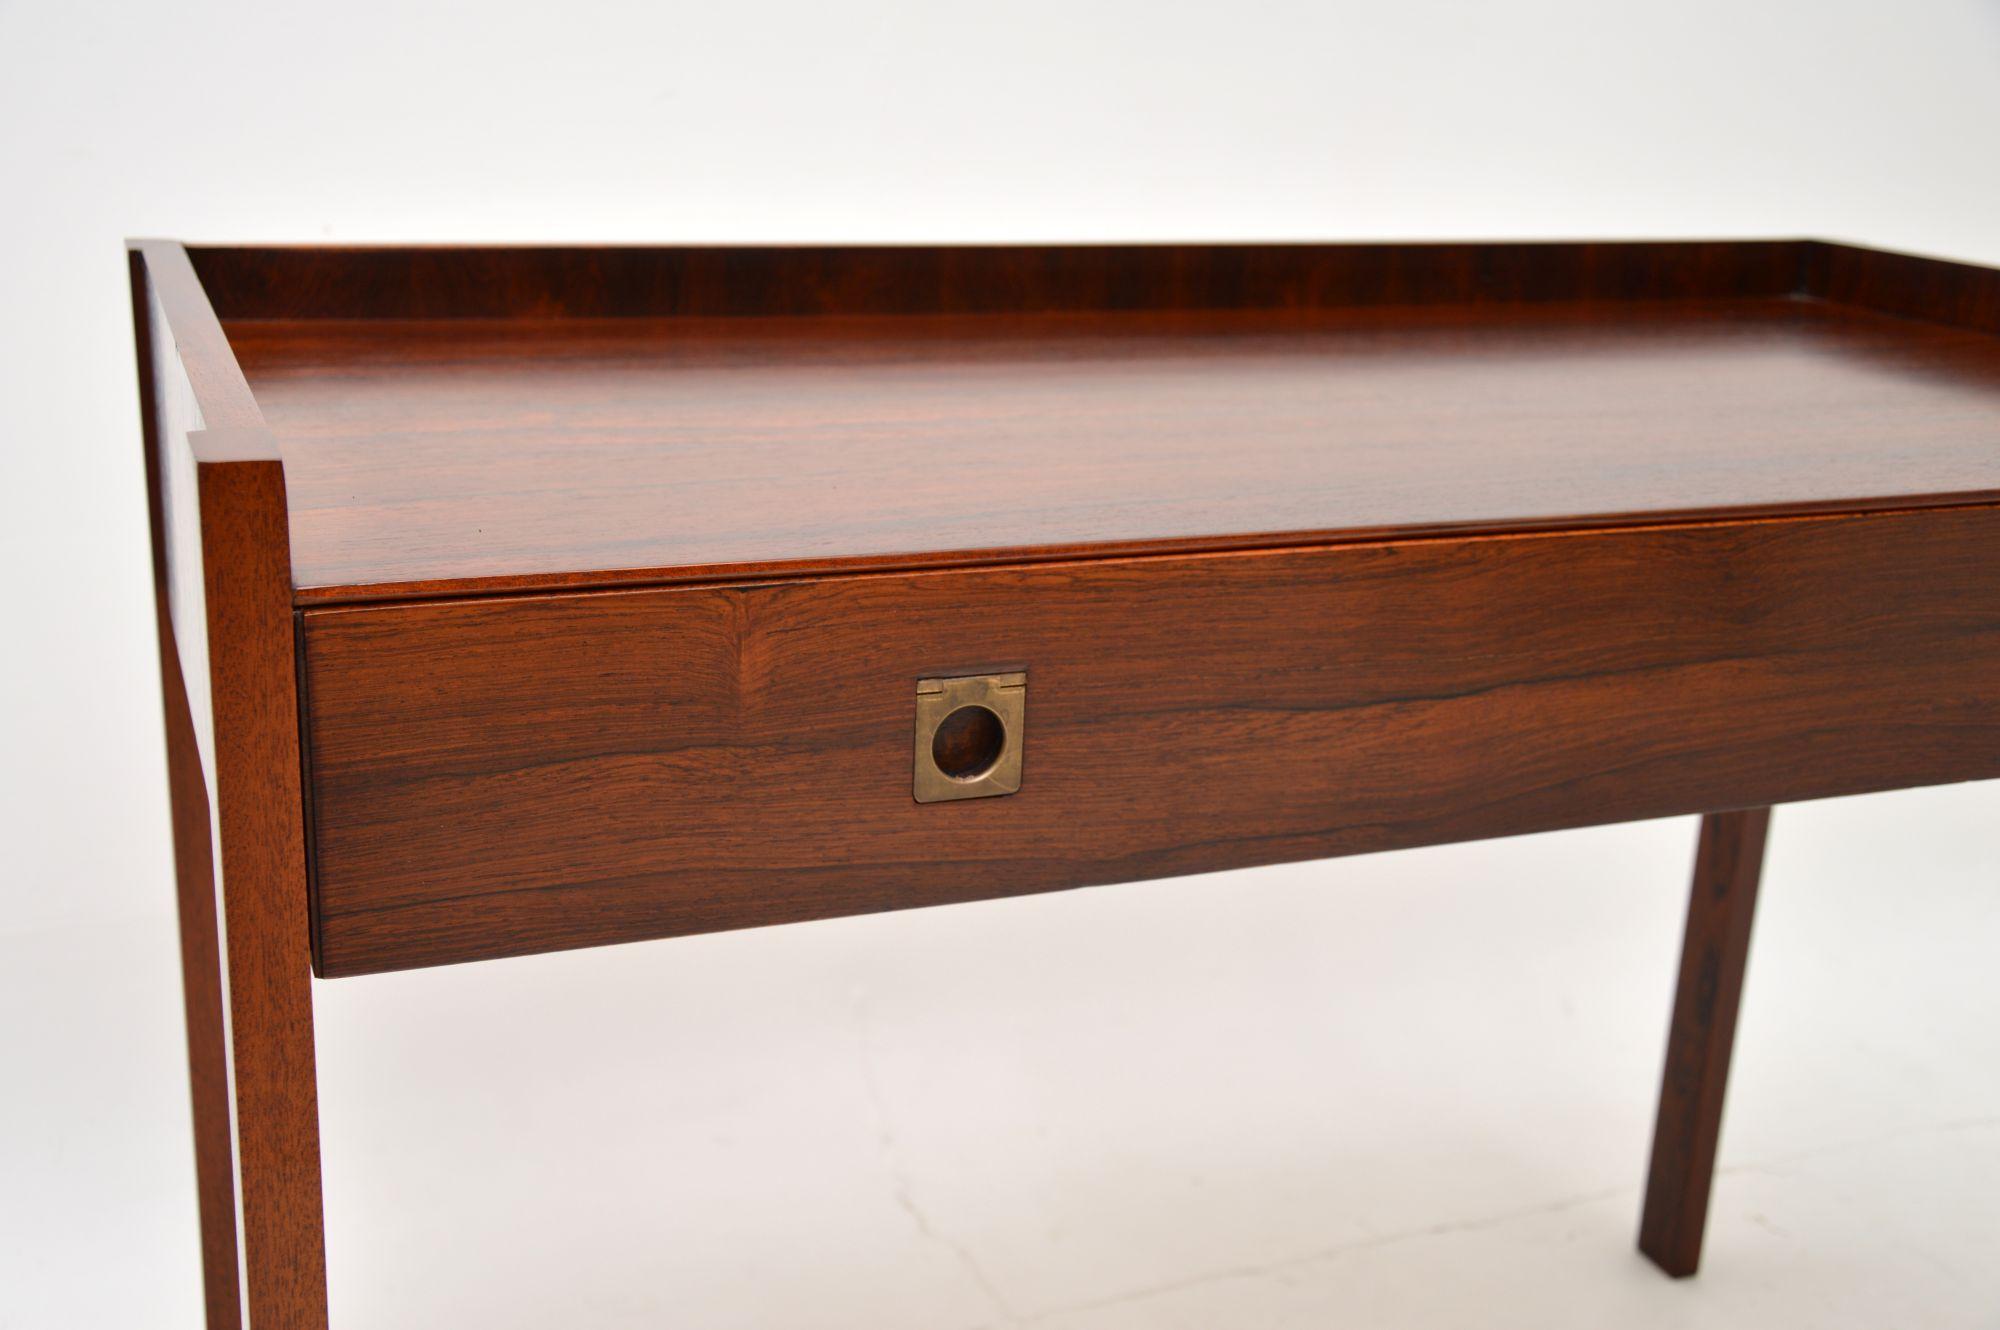 Wood Vintage Console Table / Desk by Robert Heritage for Archie Shine